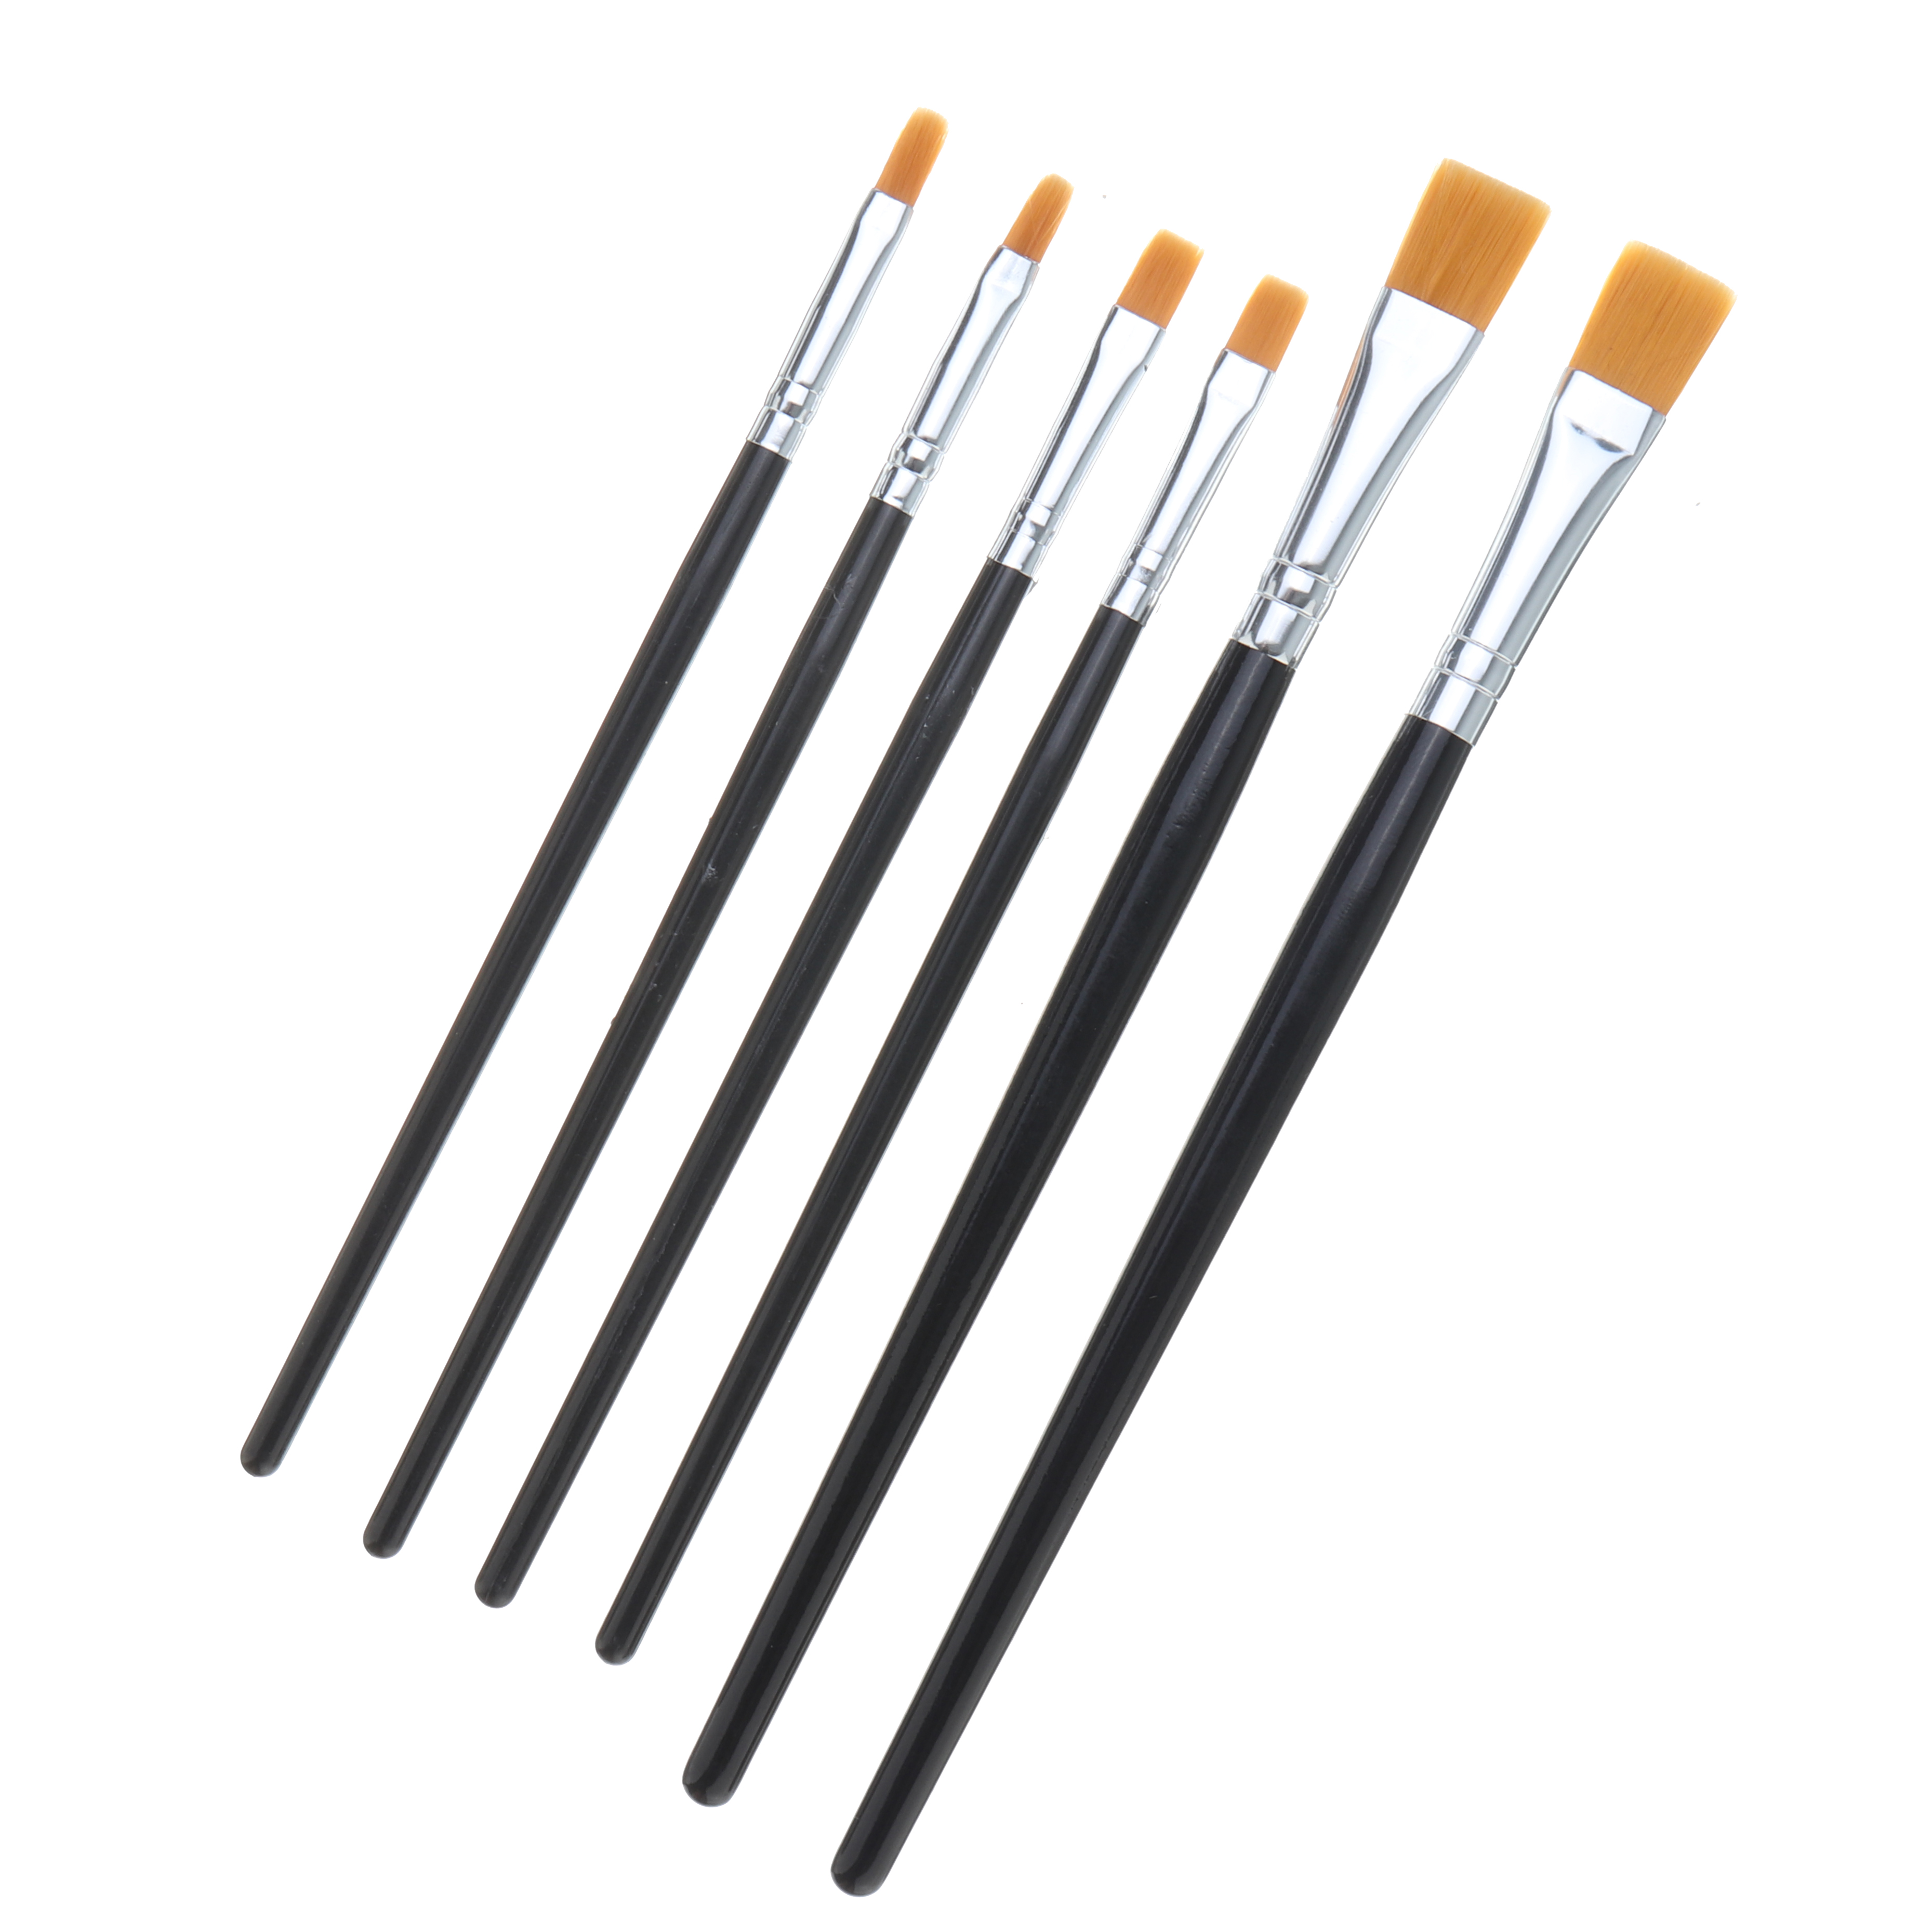 2Pcs-Model-Color-Pen-Flat-Brush-Hand-Painting-Tools-for-Oil-Painting-Pigments-1488409-1